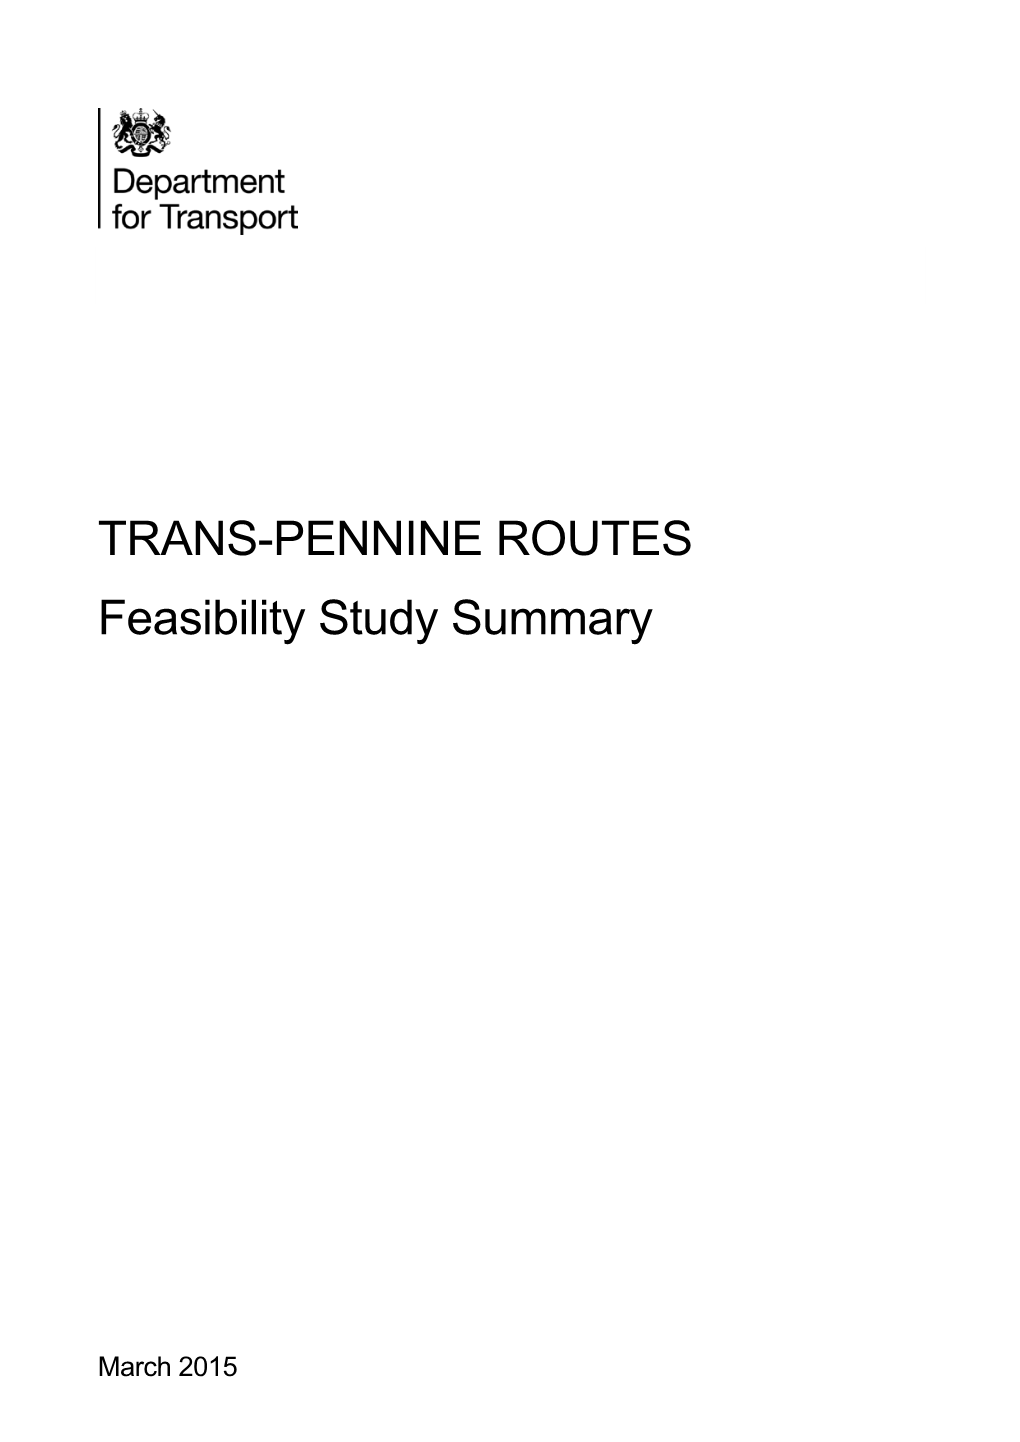 TRANS-PENNINE ROUTES Feasibility Study Summary